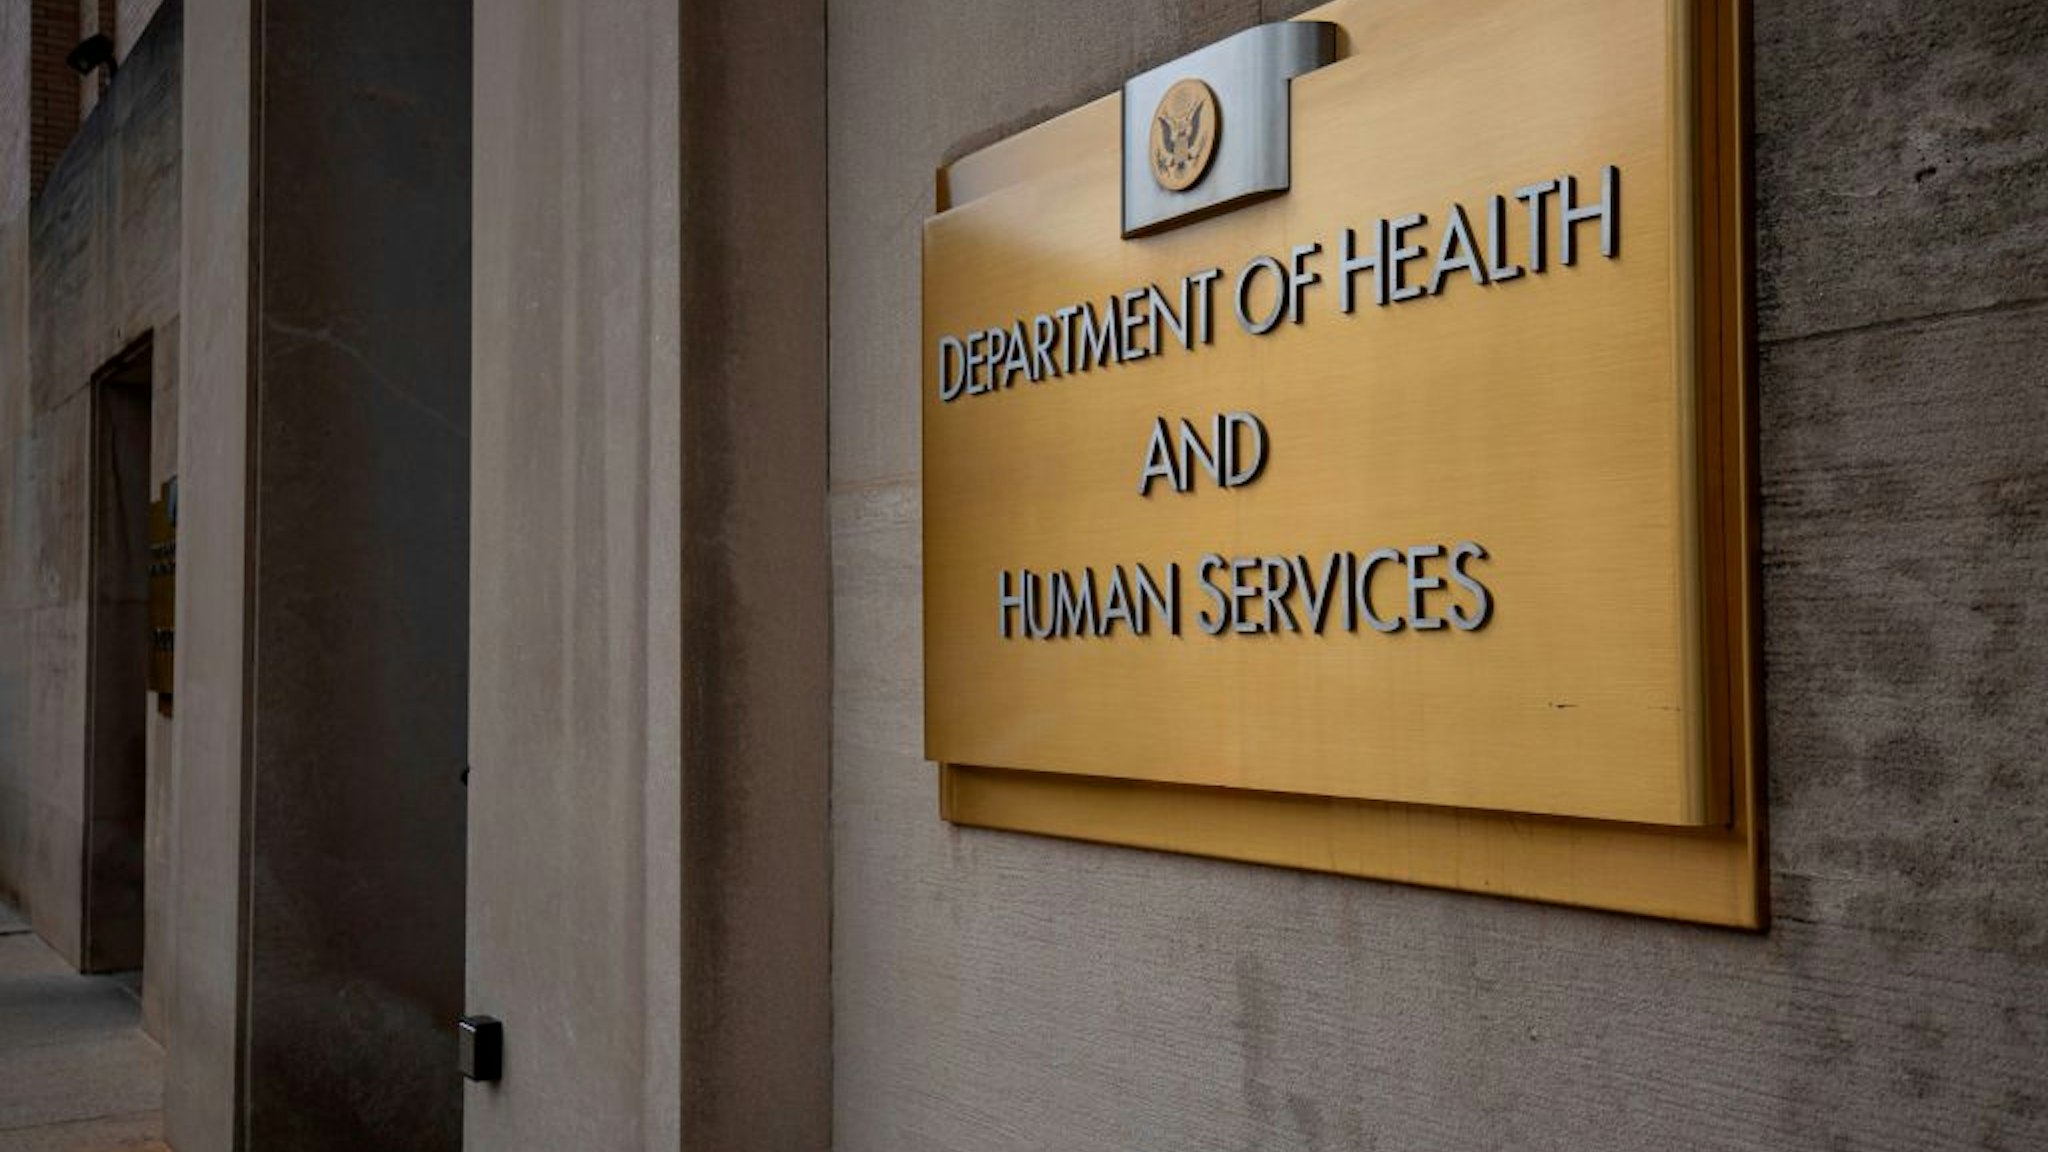 The US Department of Health and Human Services building is seen in Washington, DC, on July 22, 2019. (Photo by Alastair Pike / AFP)